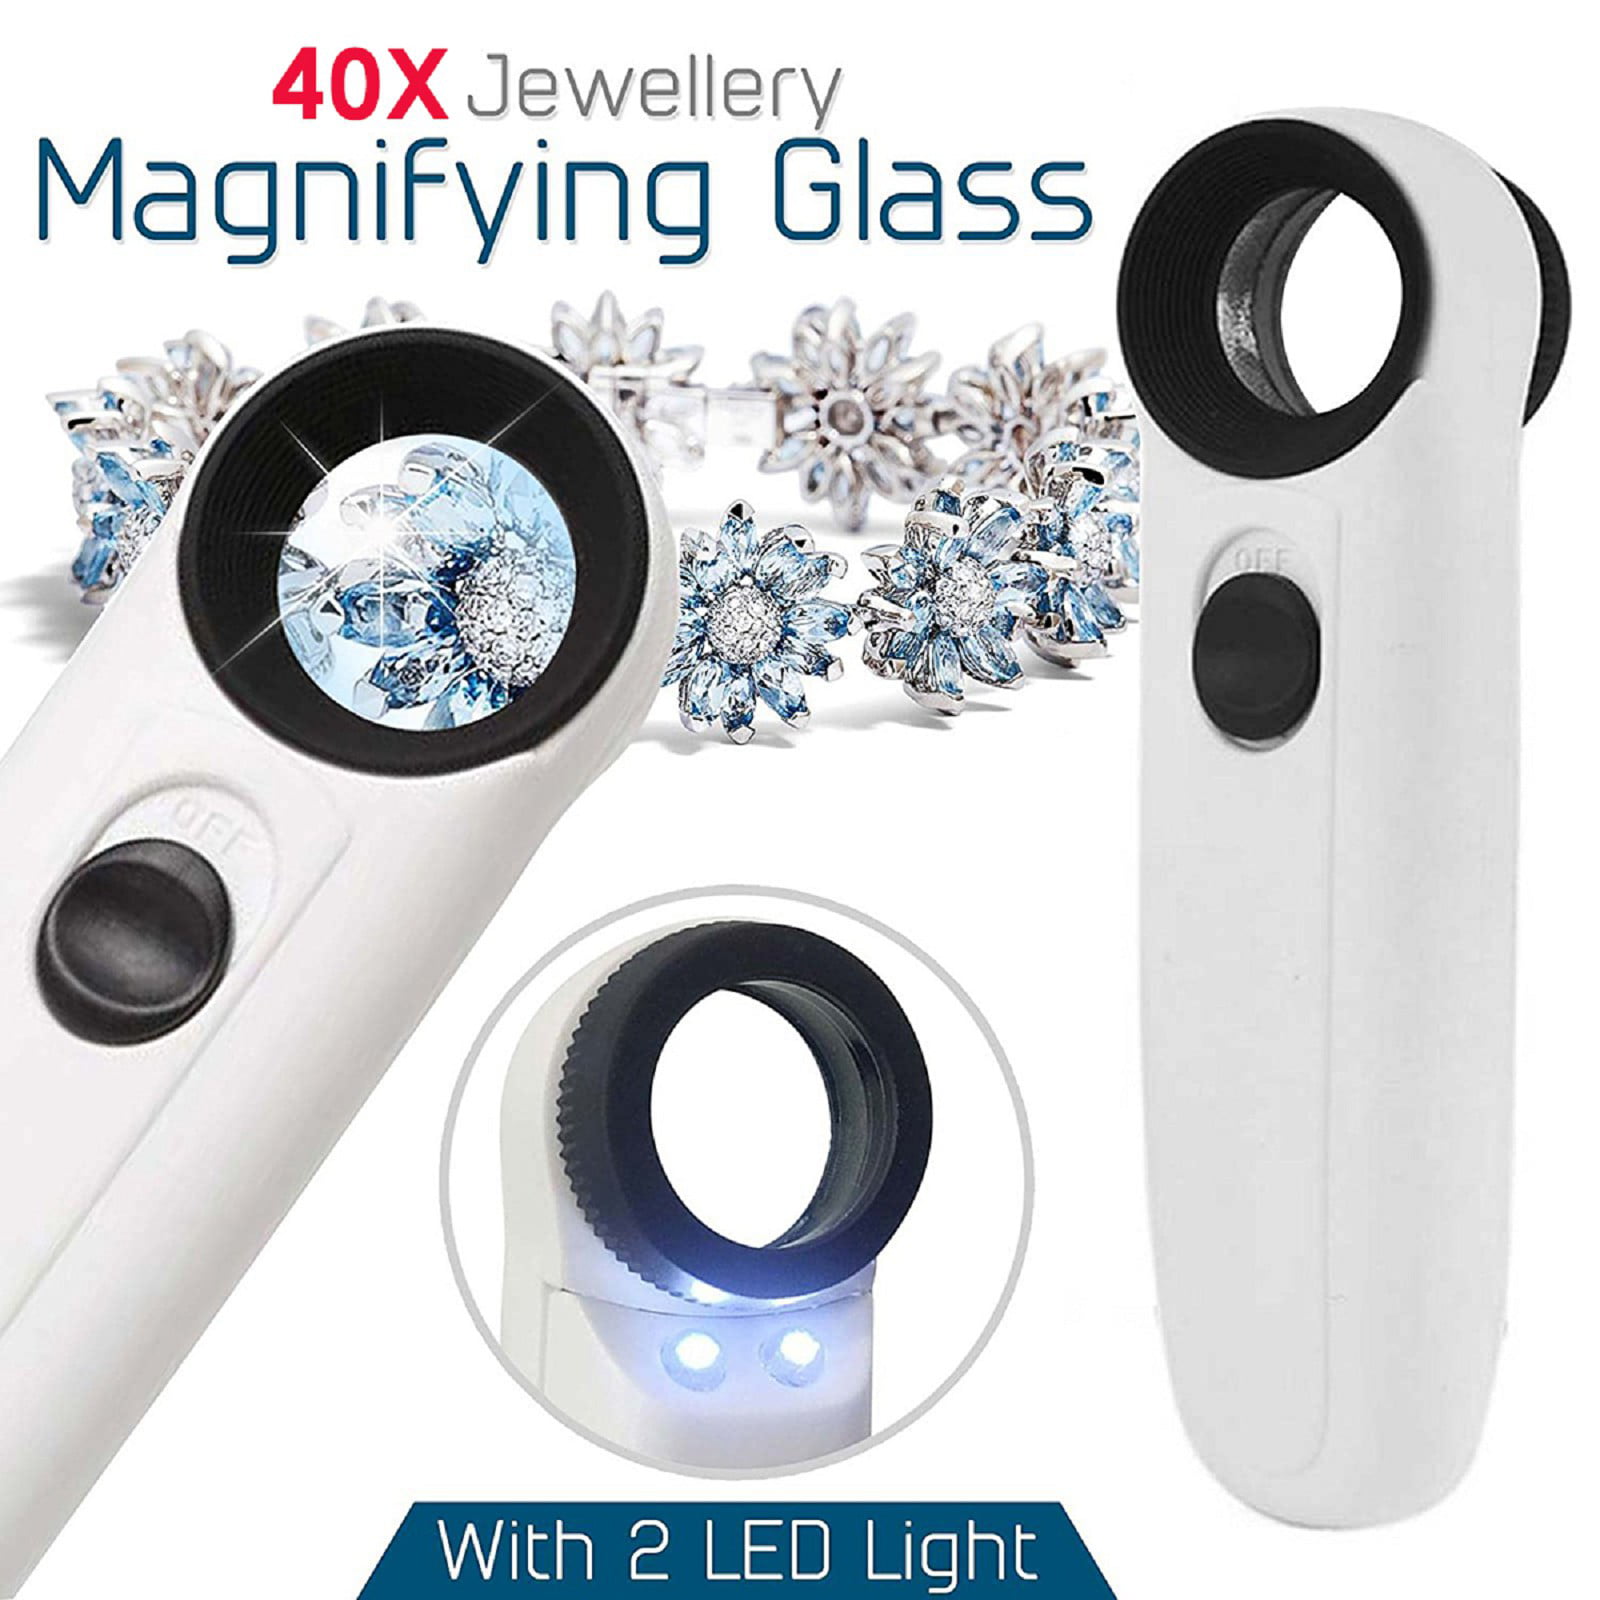 40X Magnifying Magnifier Glass Jeweler Eye Jewelry Loupe Loop with 2 LED Light 